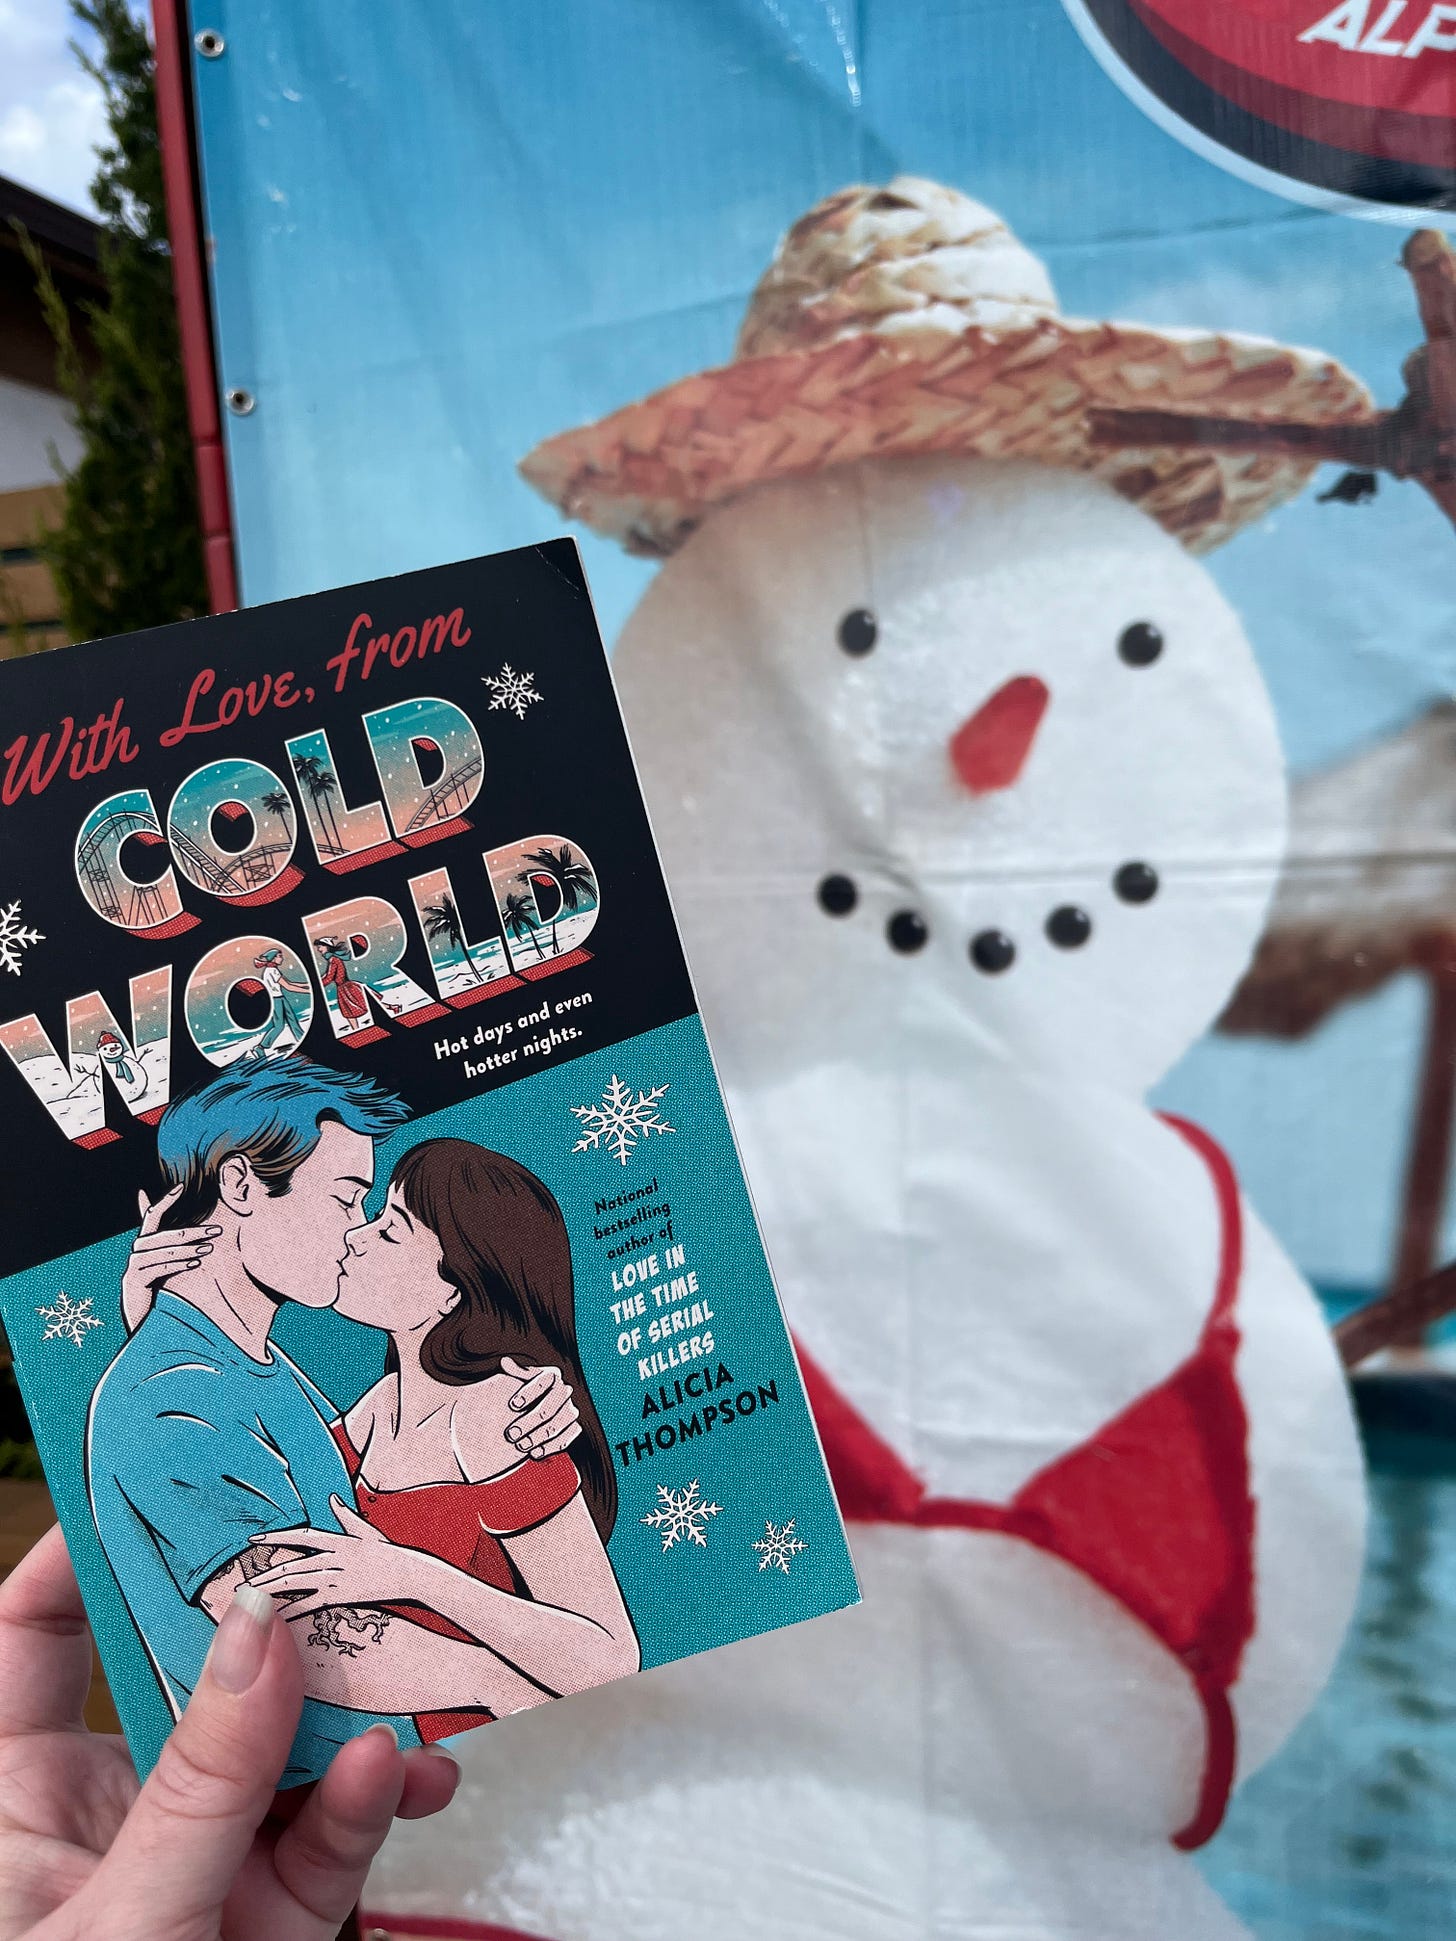 A copy of the teal cover copy of WITH LOVE, FROM COLD WORLD in front of a poster that shows a snowman with a bikini top on